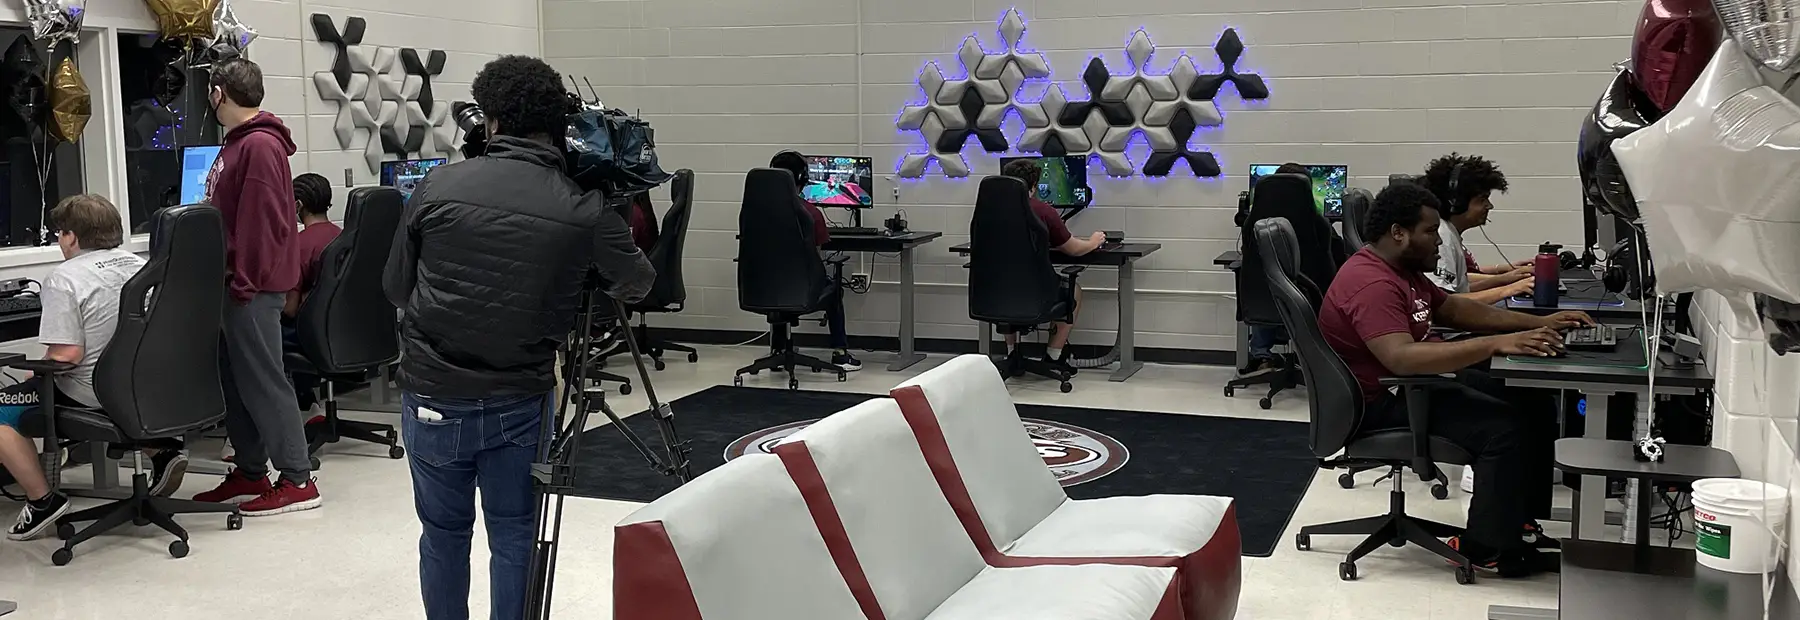 Gaming center room with students